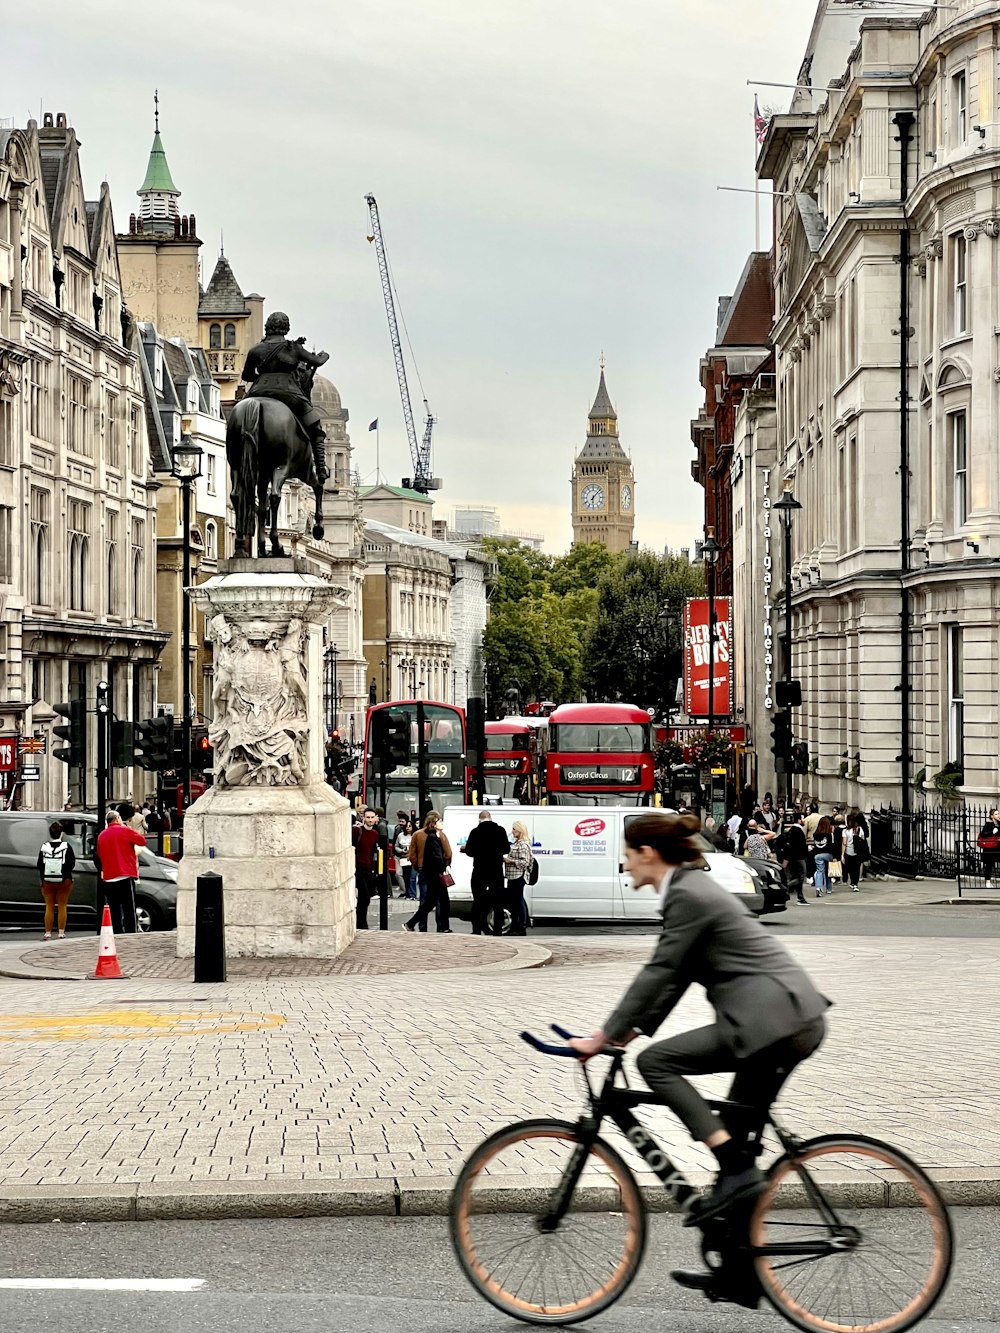 a person riding a bicycle in a city